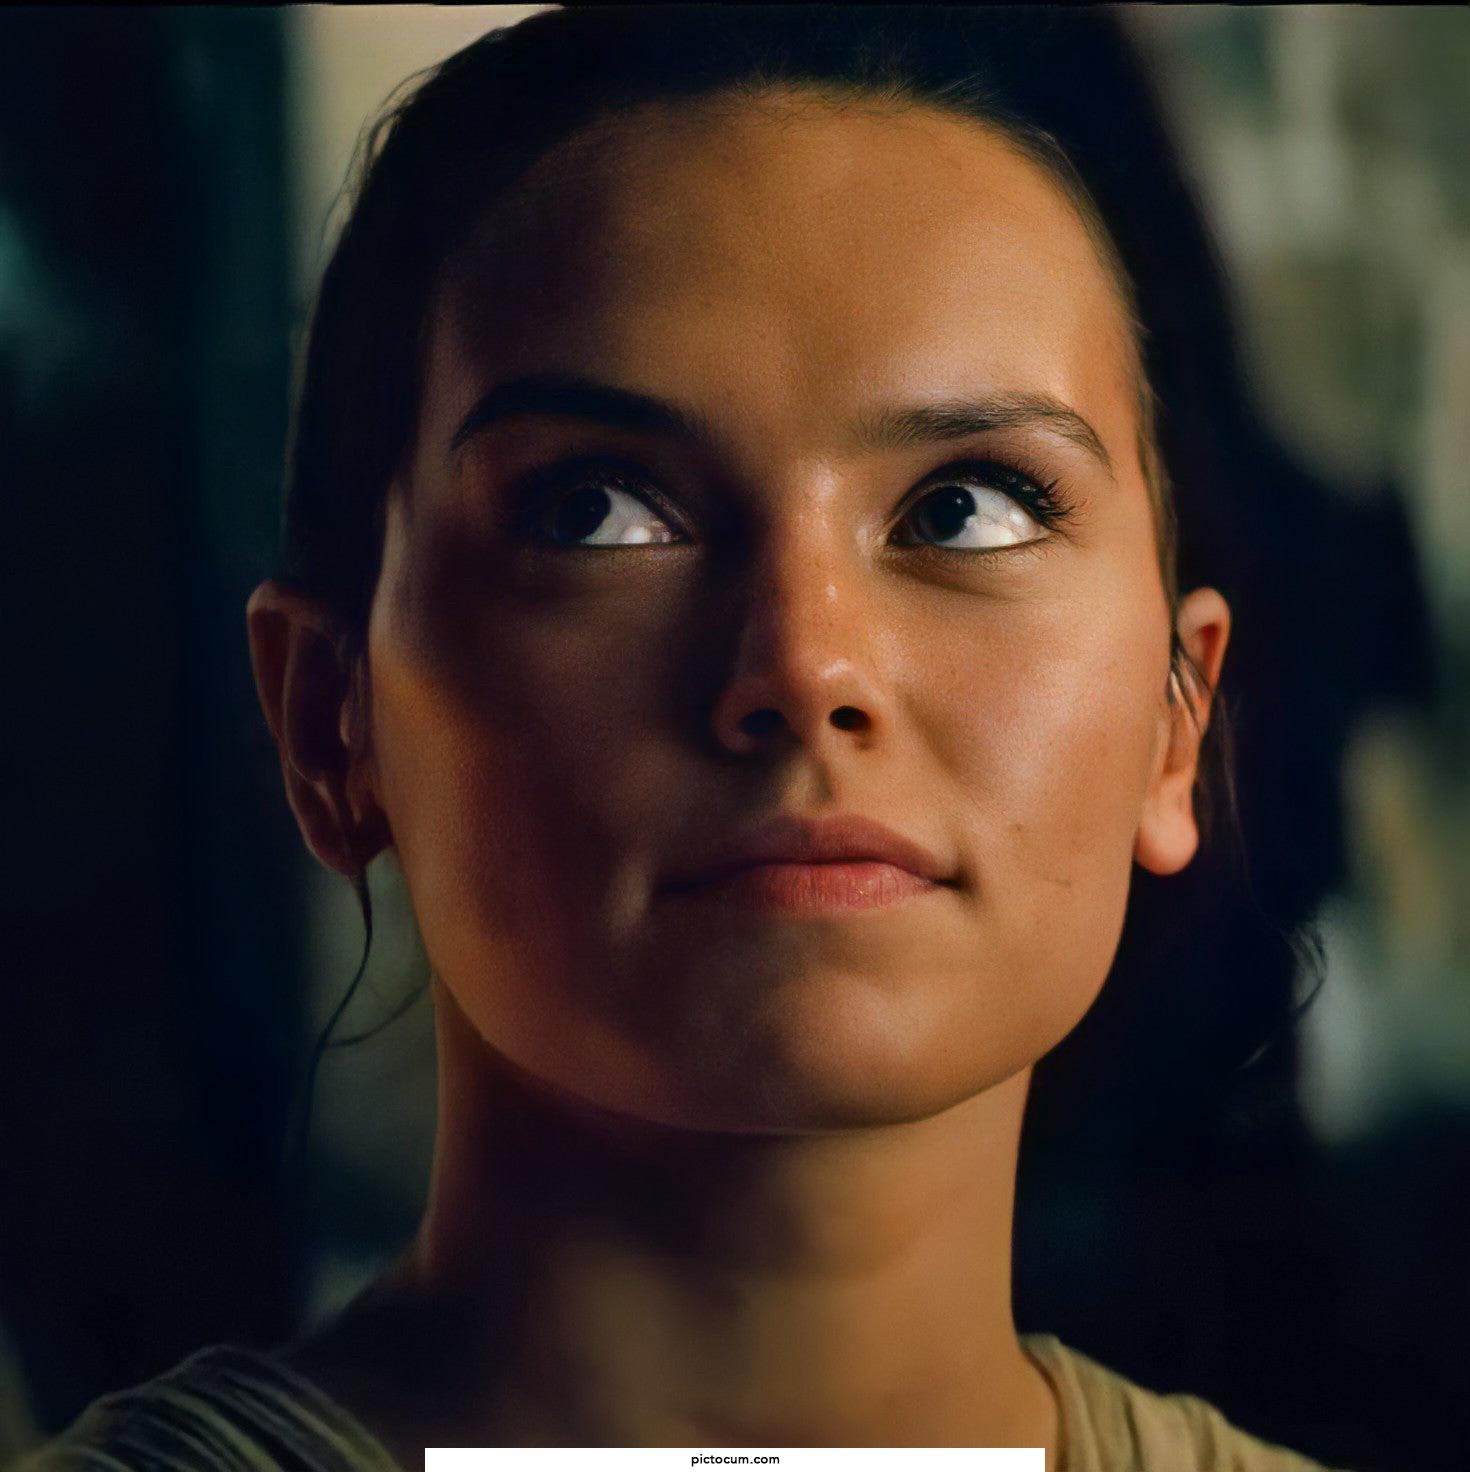 Imagine being able to look down at Daisy Ridley’s eyes as they water up while your cock reaches the back of her throat, getting coated in all her nice warm throatslime 🤤